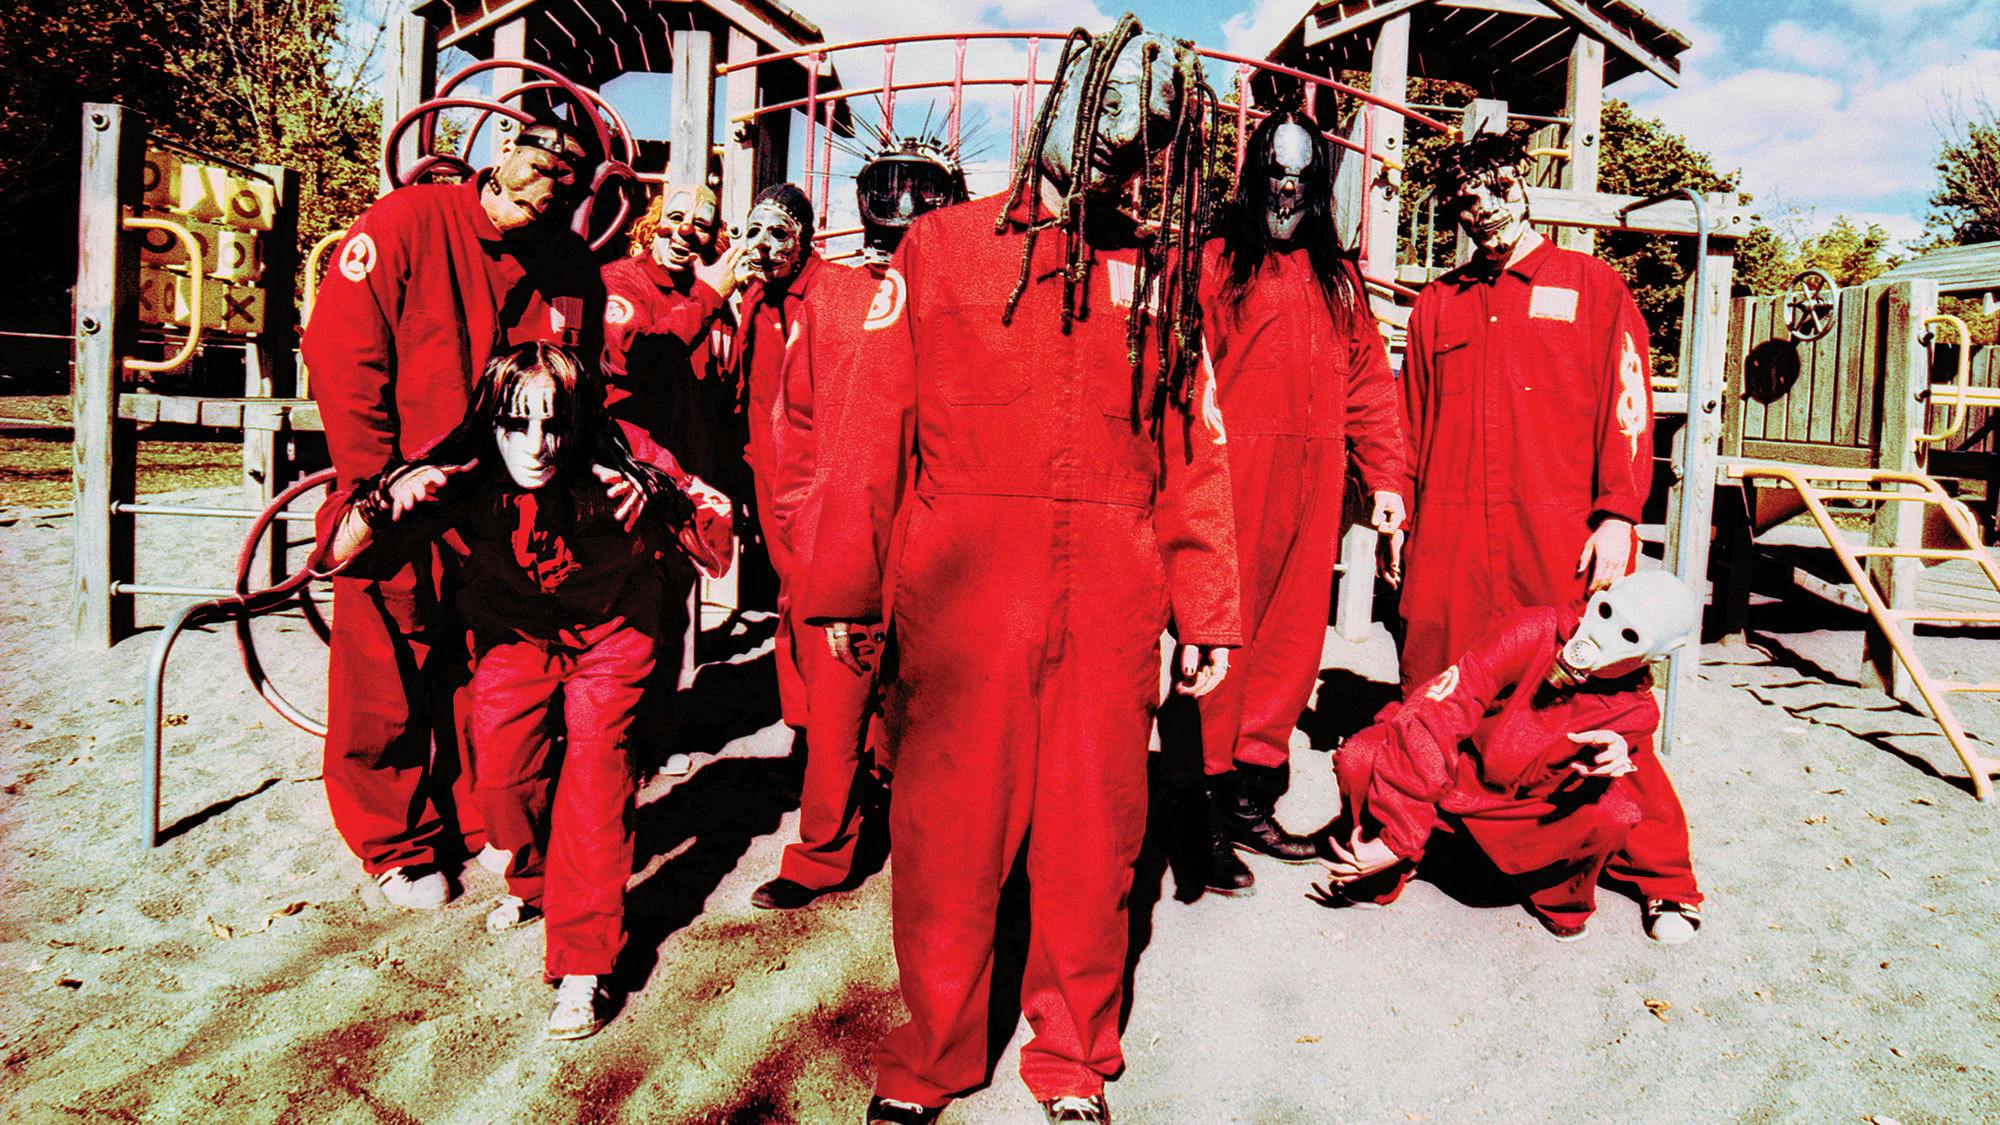 "Thoroughly unpleasant and truly unforgettable": Our original 1999 review of Slipknot's debut album